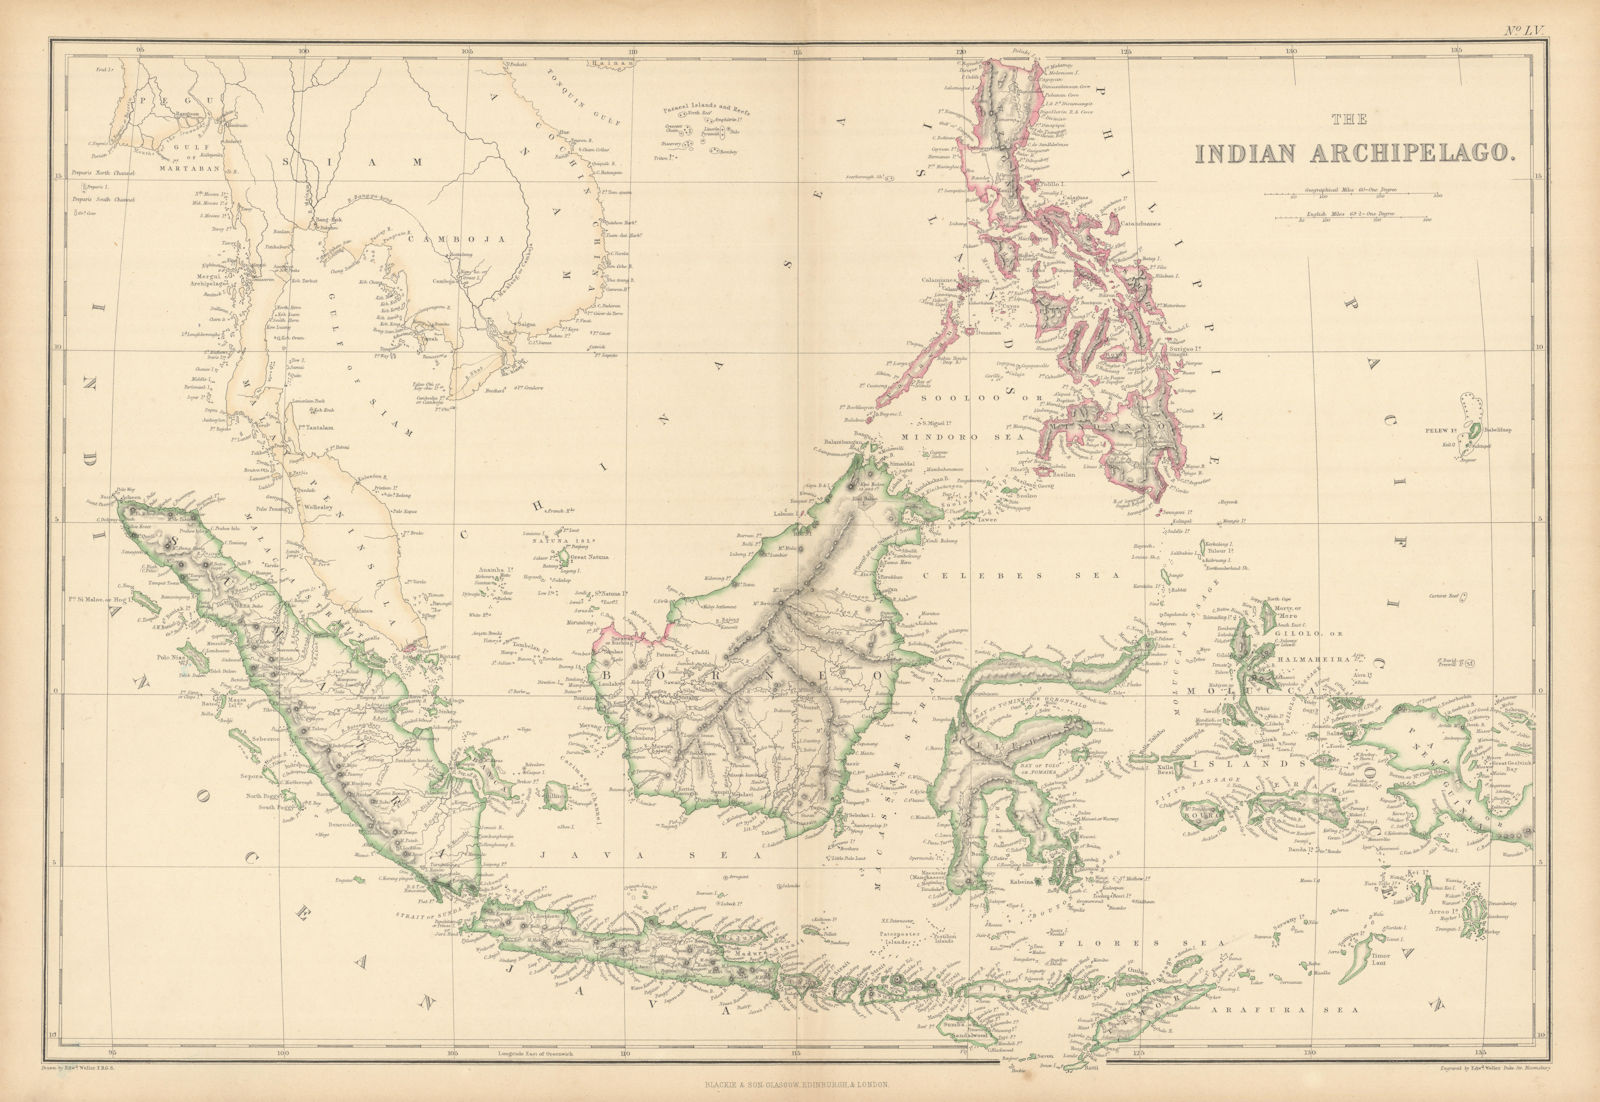 The Indian Archipelago. East Indies Indonesia Philippines. WELLER 1859 old map